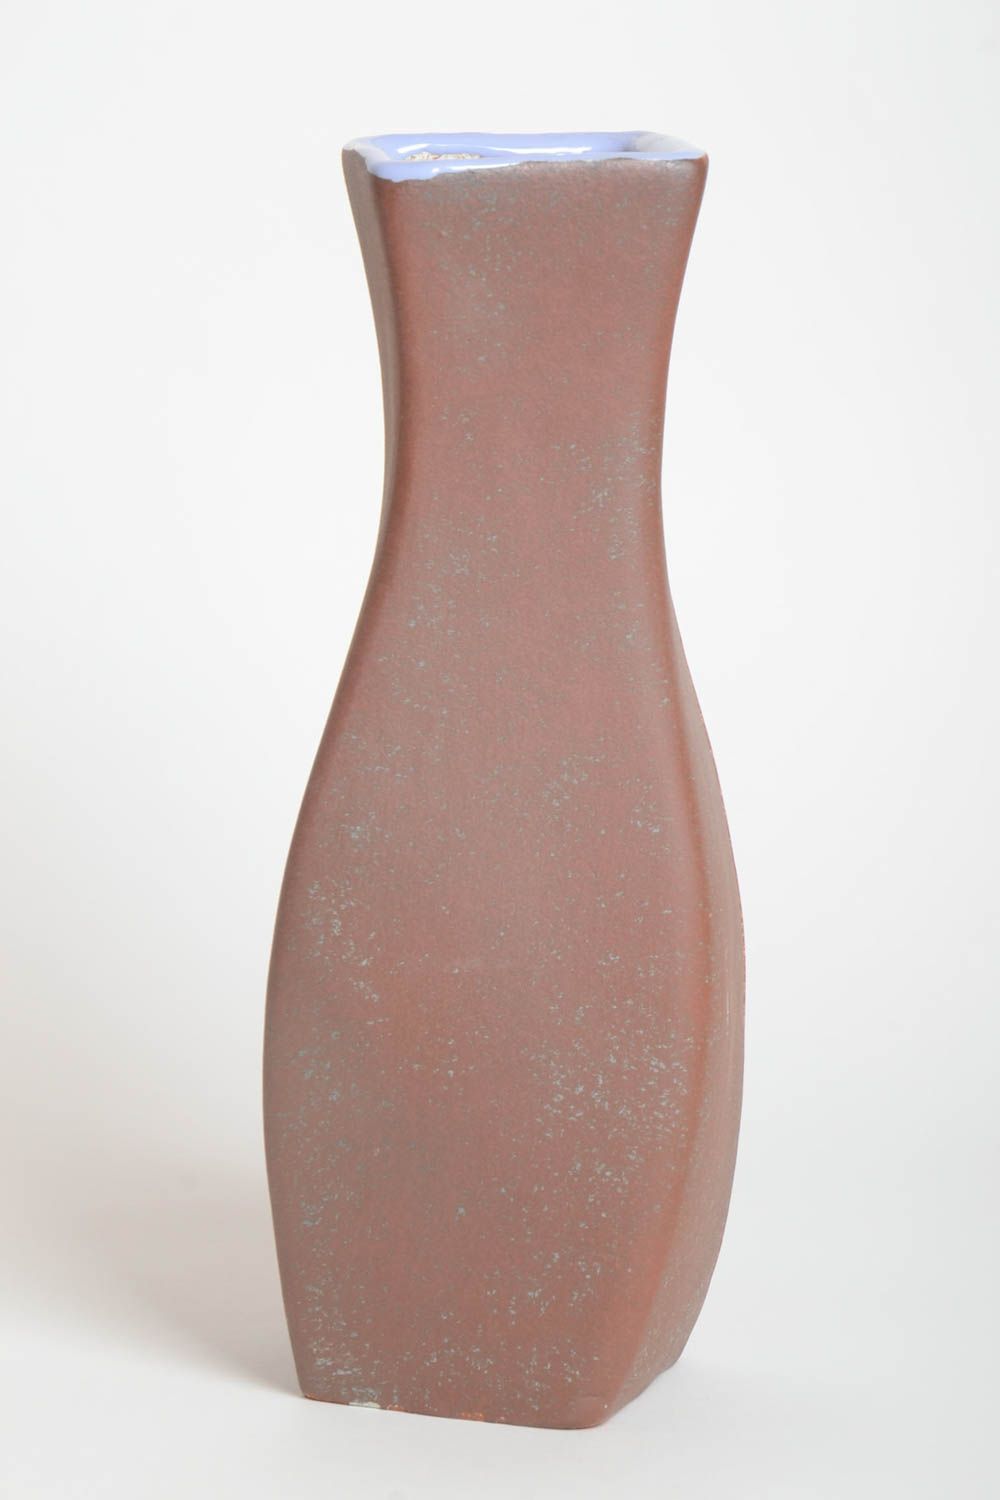 12 inches tall vase large for floor décor 2,7 lb photo 4